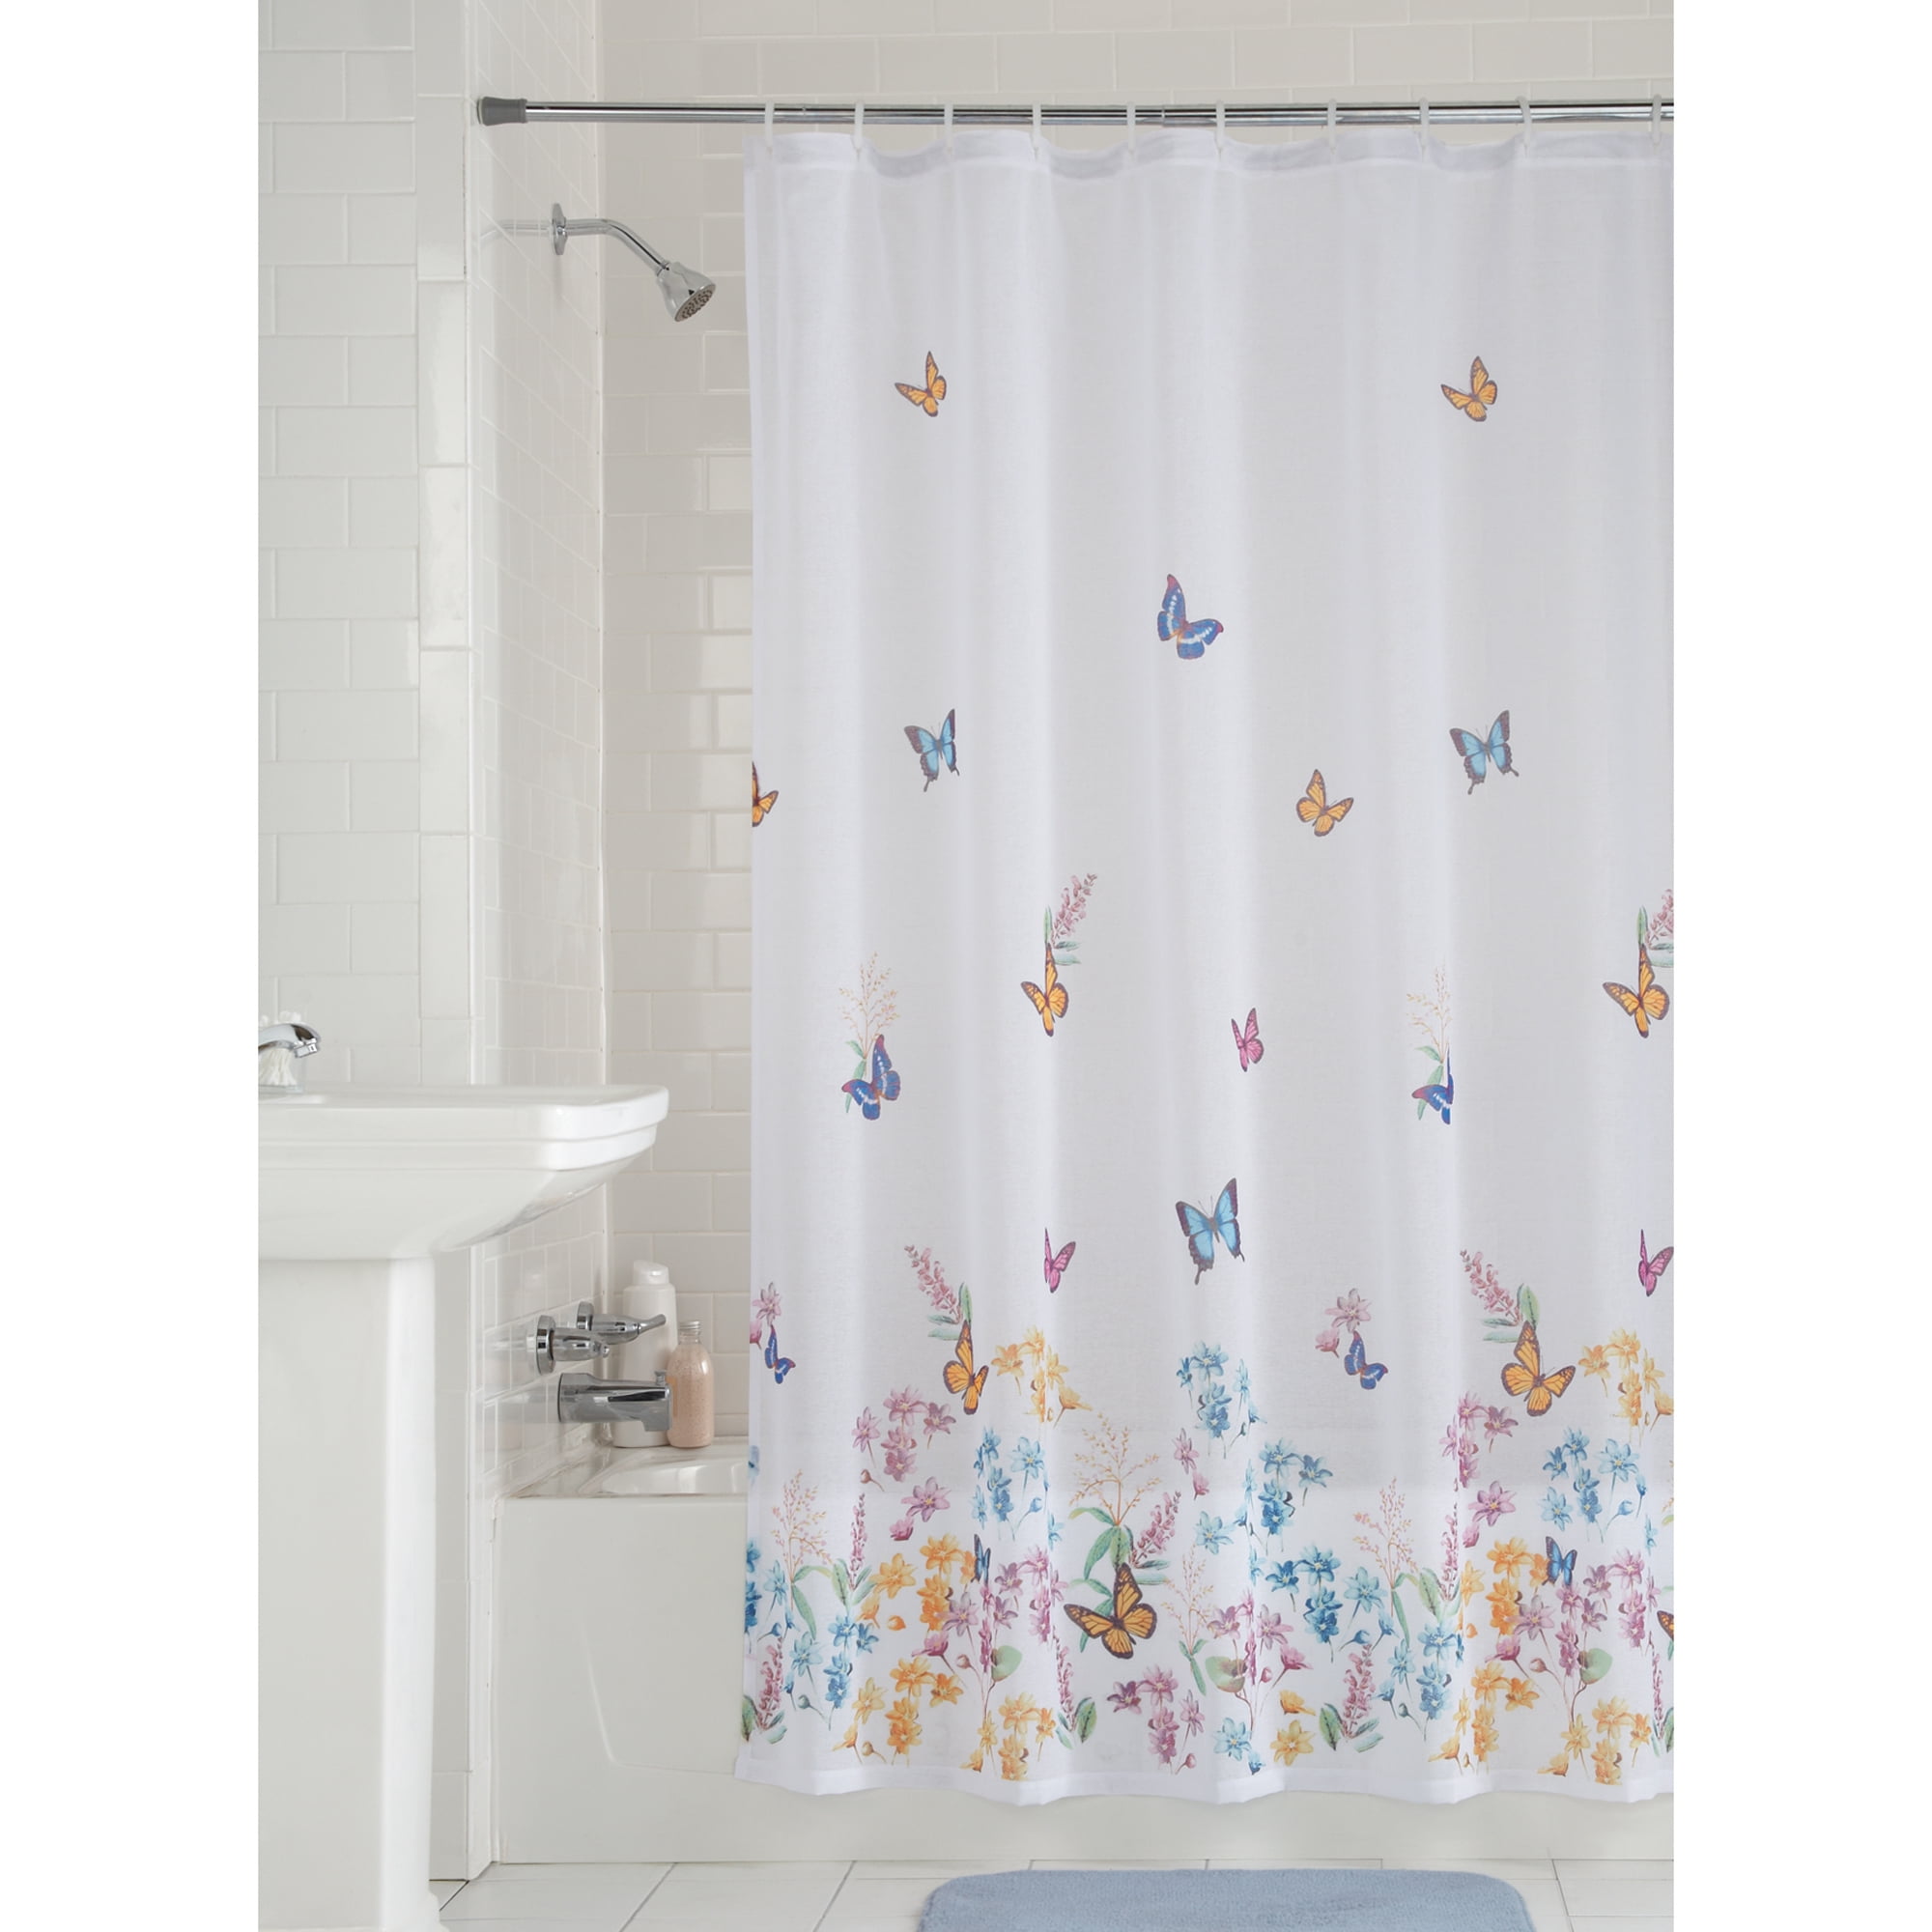 White Silver Print Farmhouse Waterproof Bathroom Decorative Rustic Kids Shower Curtain with 12 Rust Proof Grommets for Spa Hotel 70x72 Inches Jubilantex Butterfly Shower Curtain for Bathroom